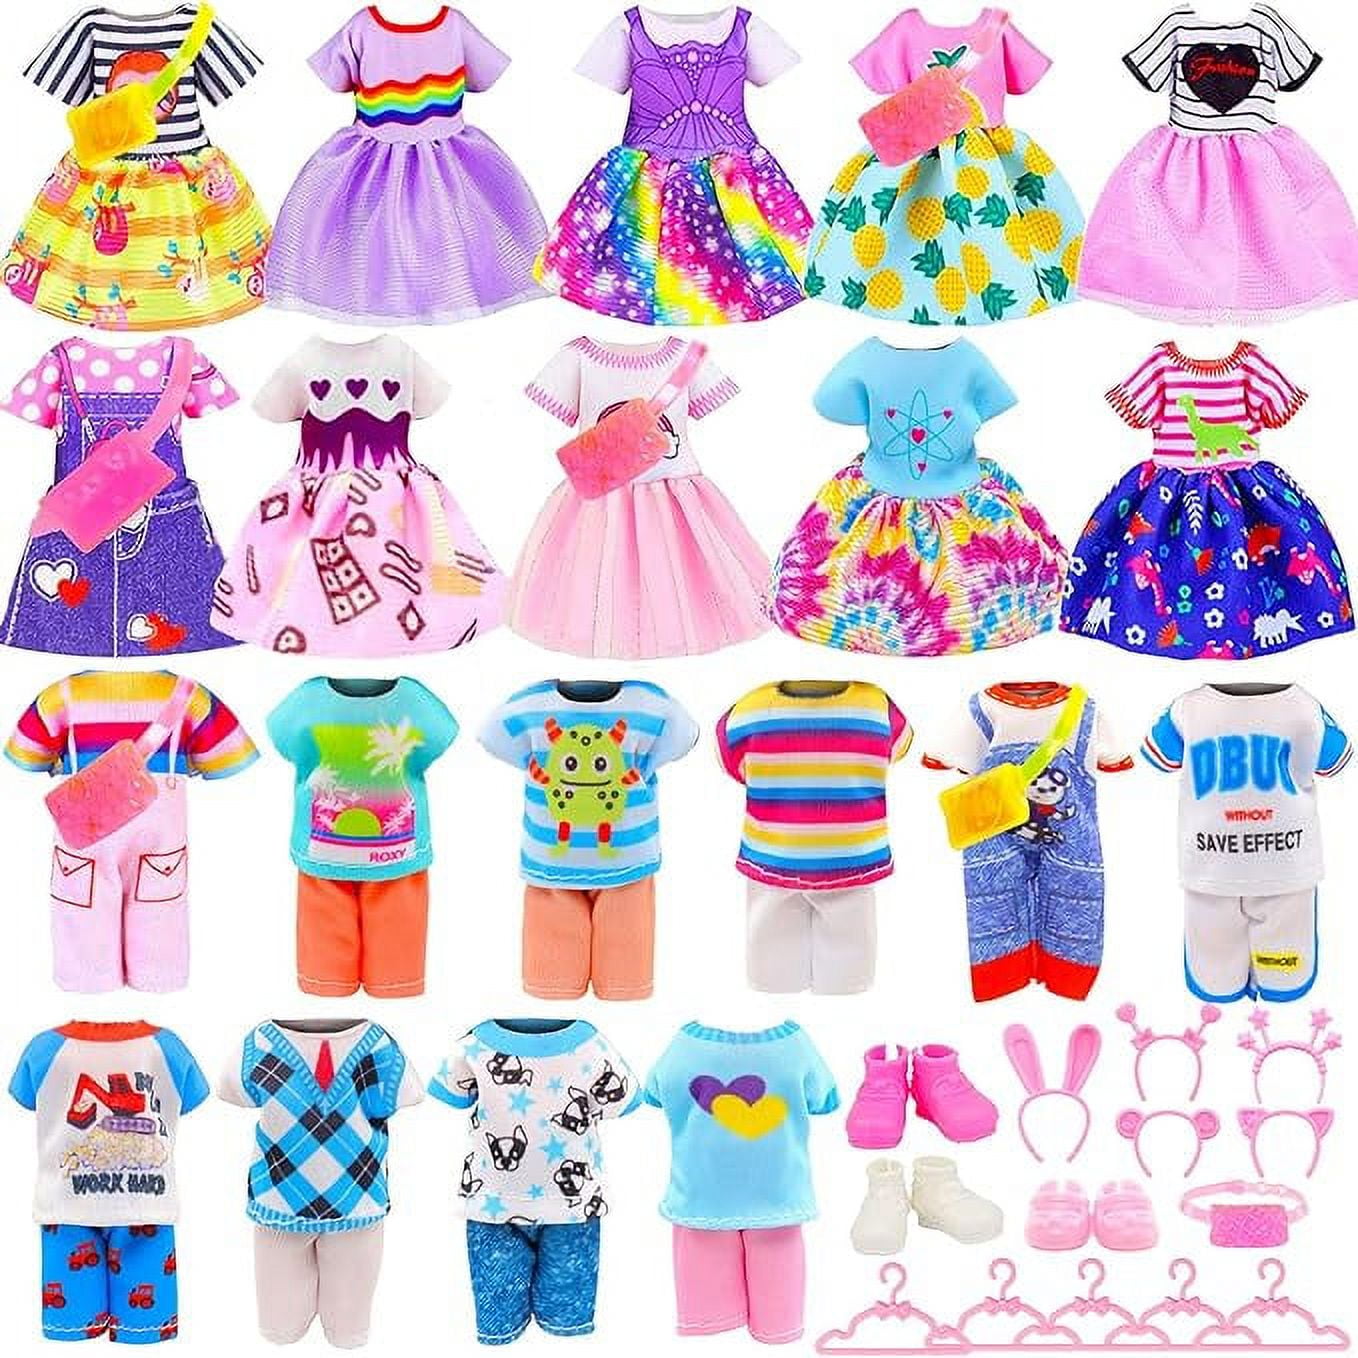 ENOCHT 5.3 Inch Doll Clothes and Accessories 5 Chelsea Doll Outfits 5 ...